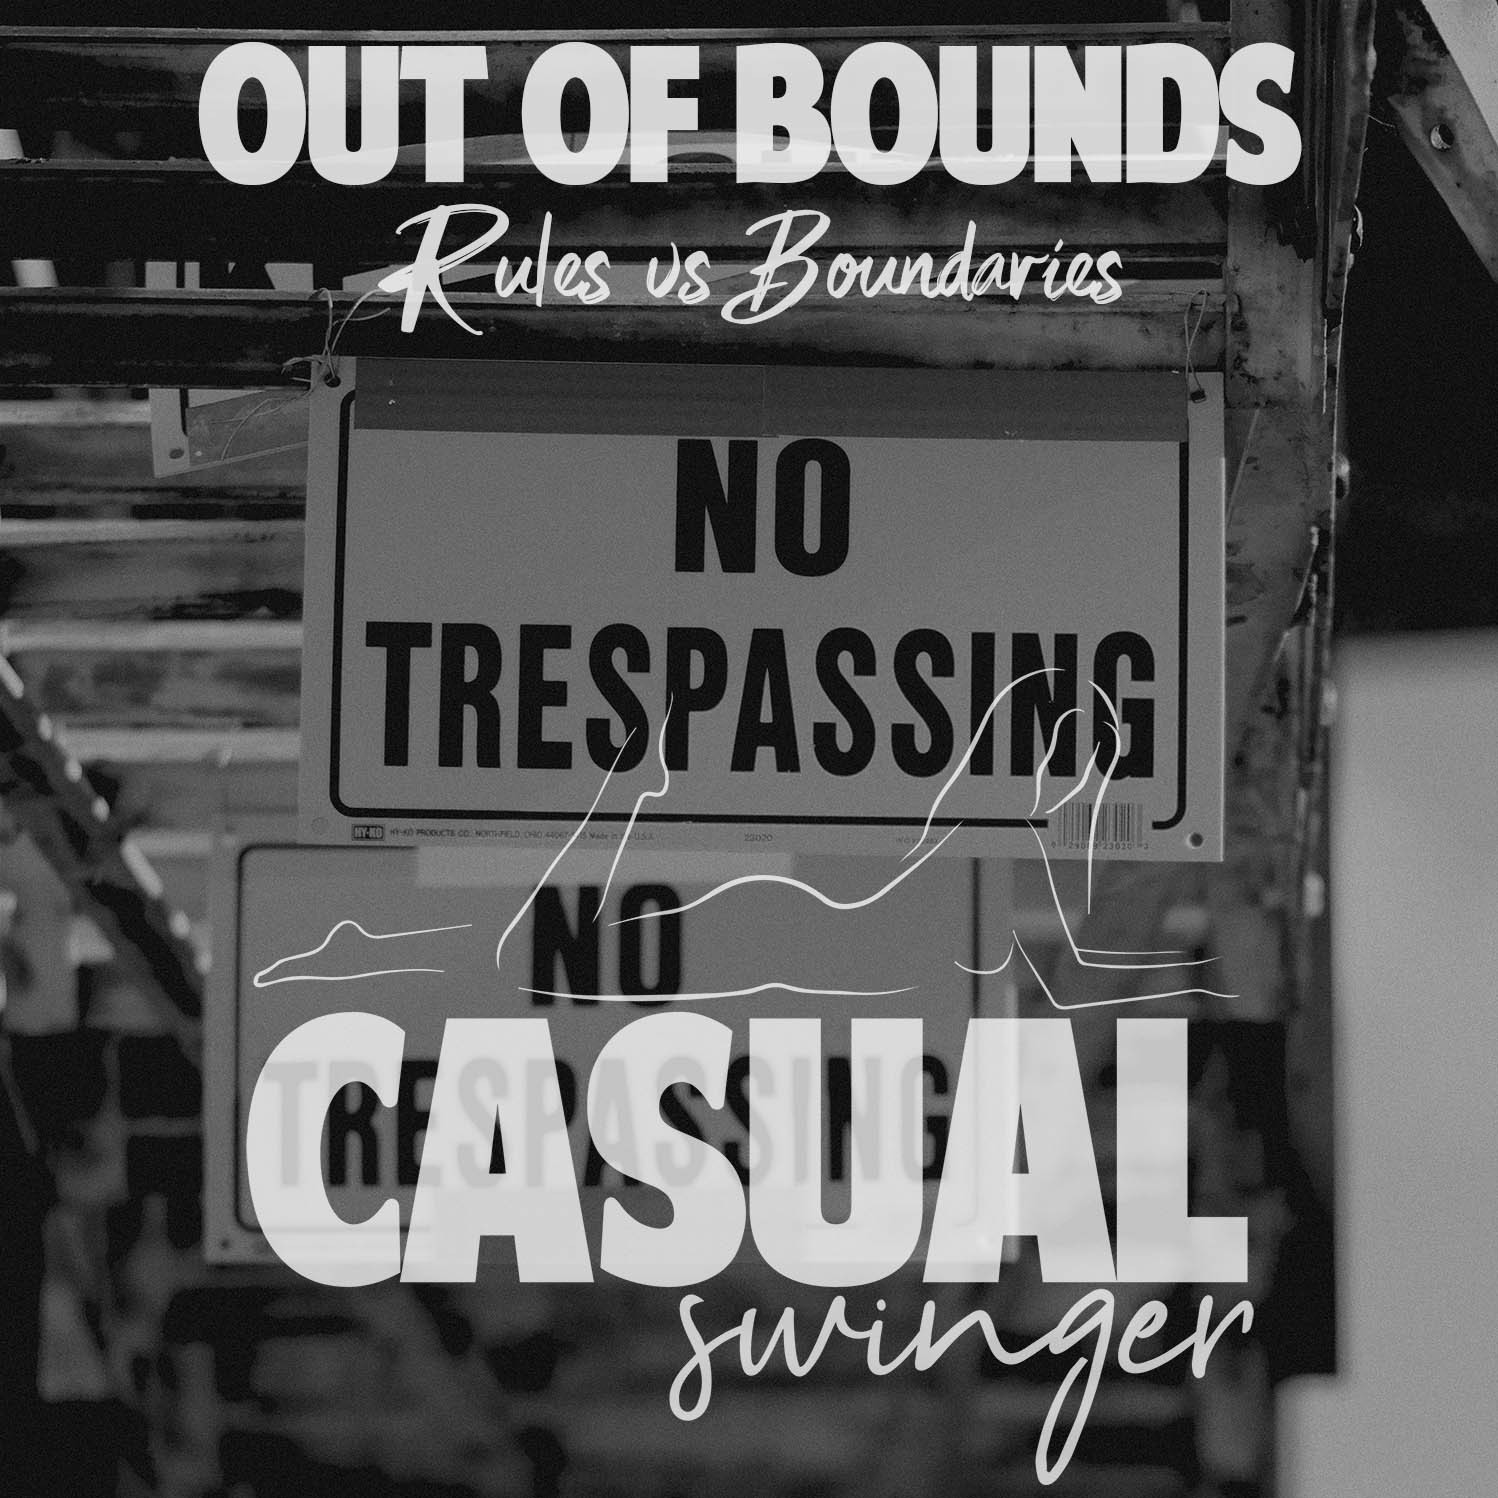 Out of Bounds - Rules vs Boundaries in the Lifestyle picture